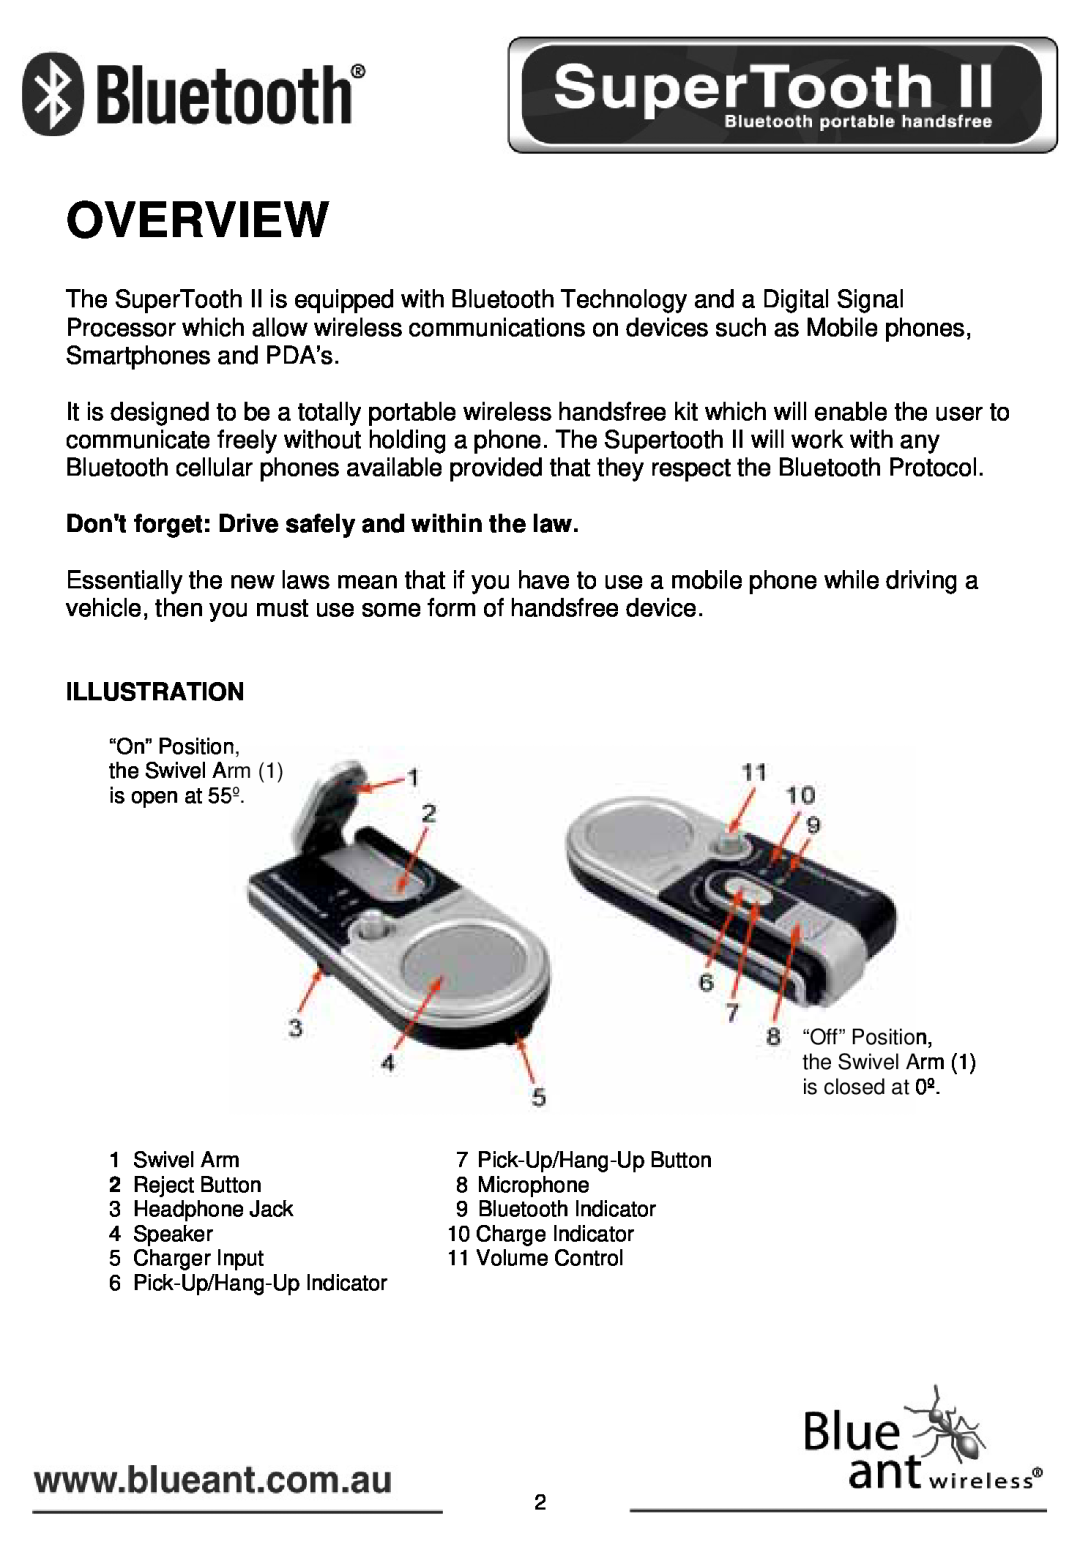 BlueAnt Wireless SUPERTOOTH II manual Overview, Dont forget Drive safely and within the law, Illustration 